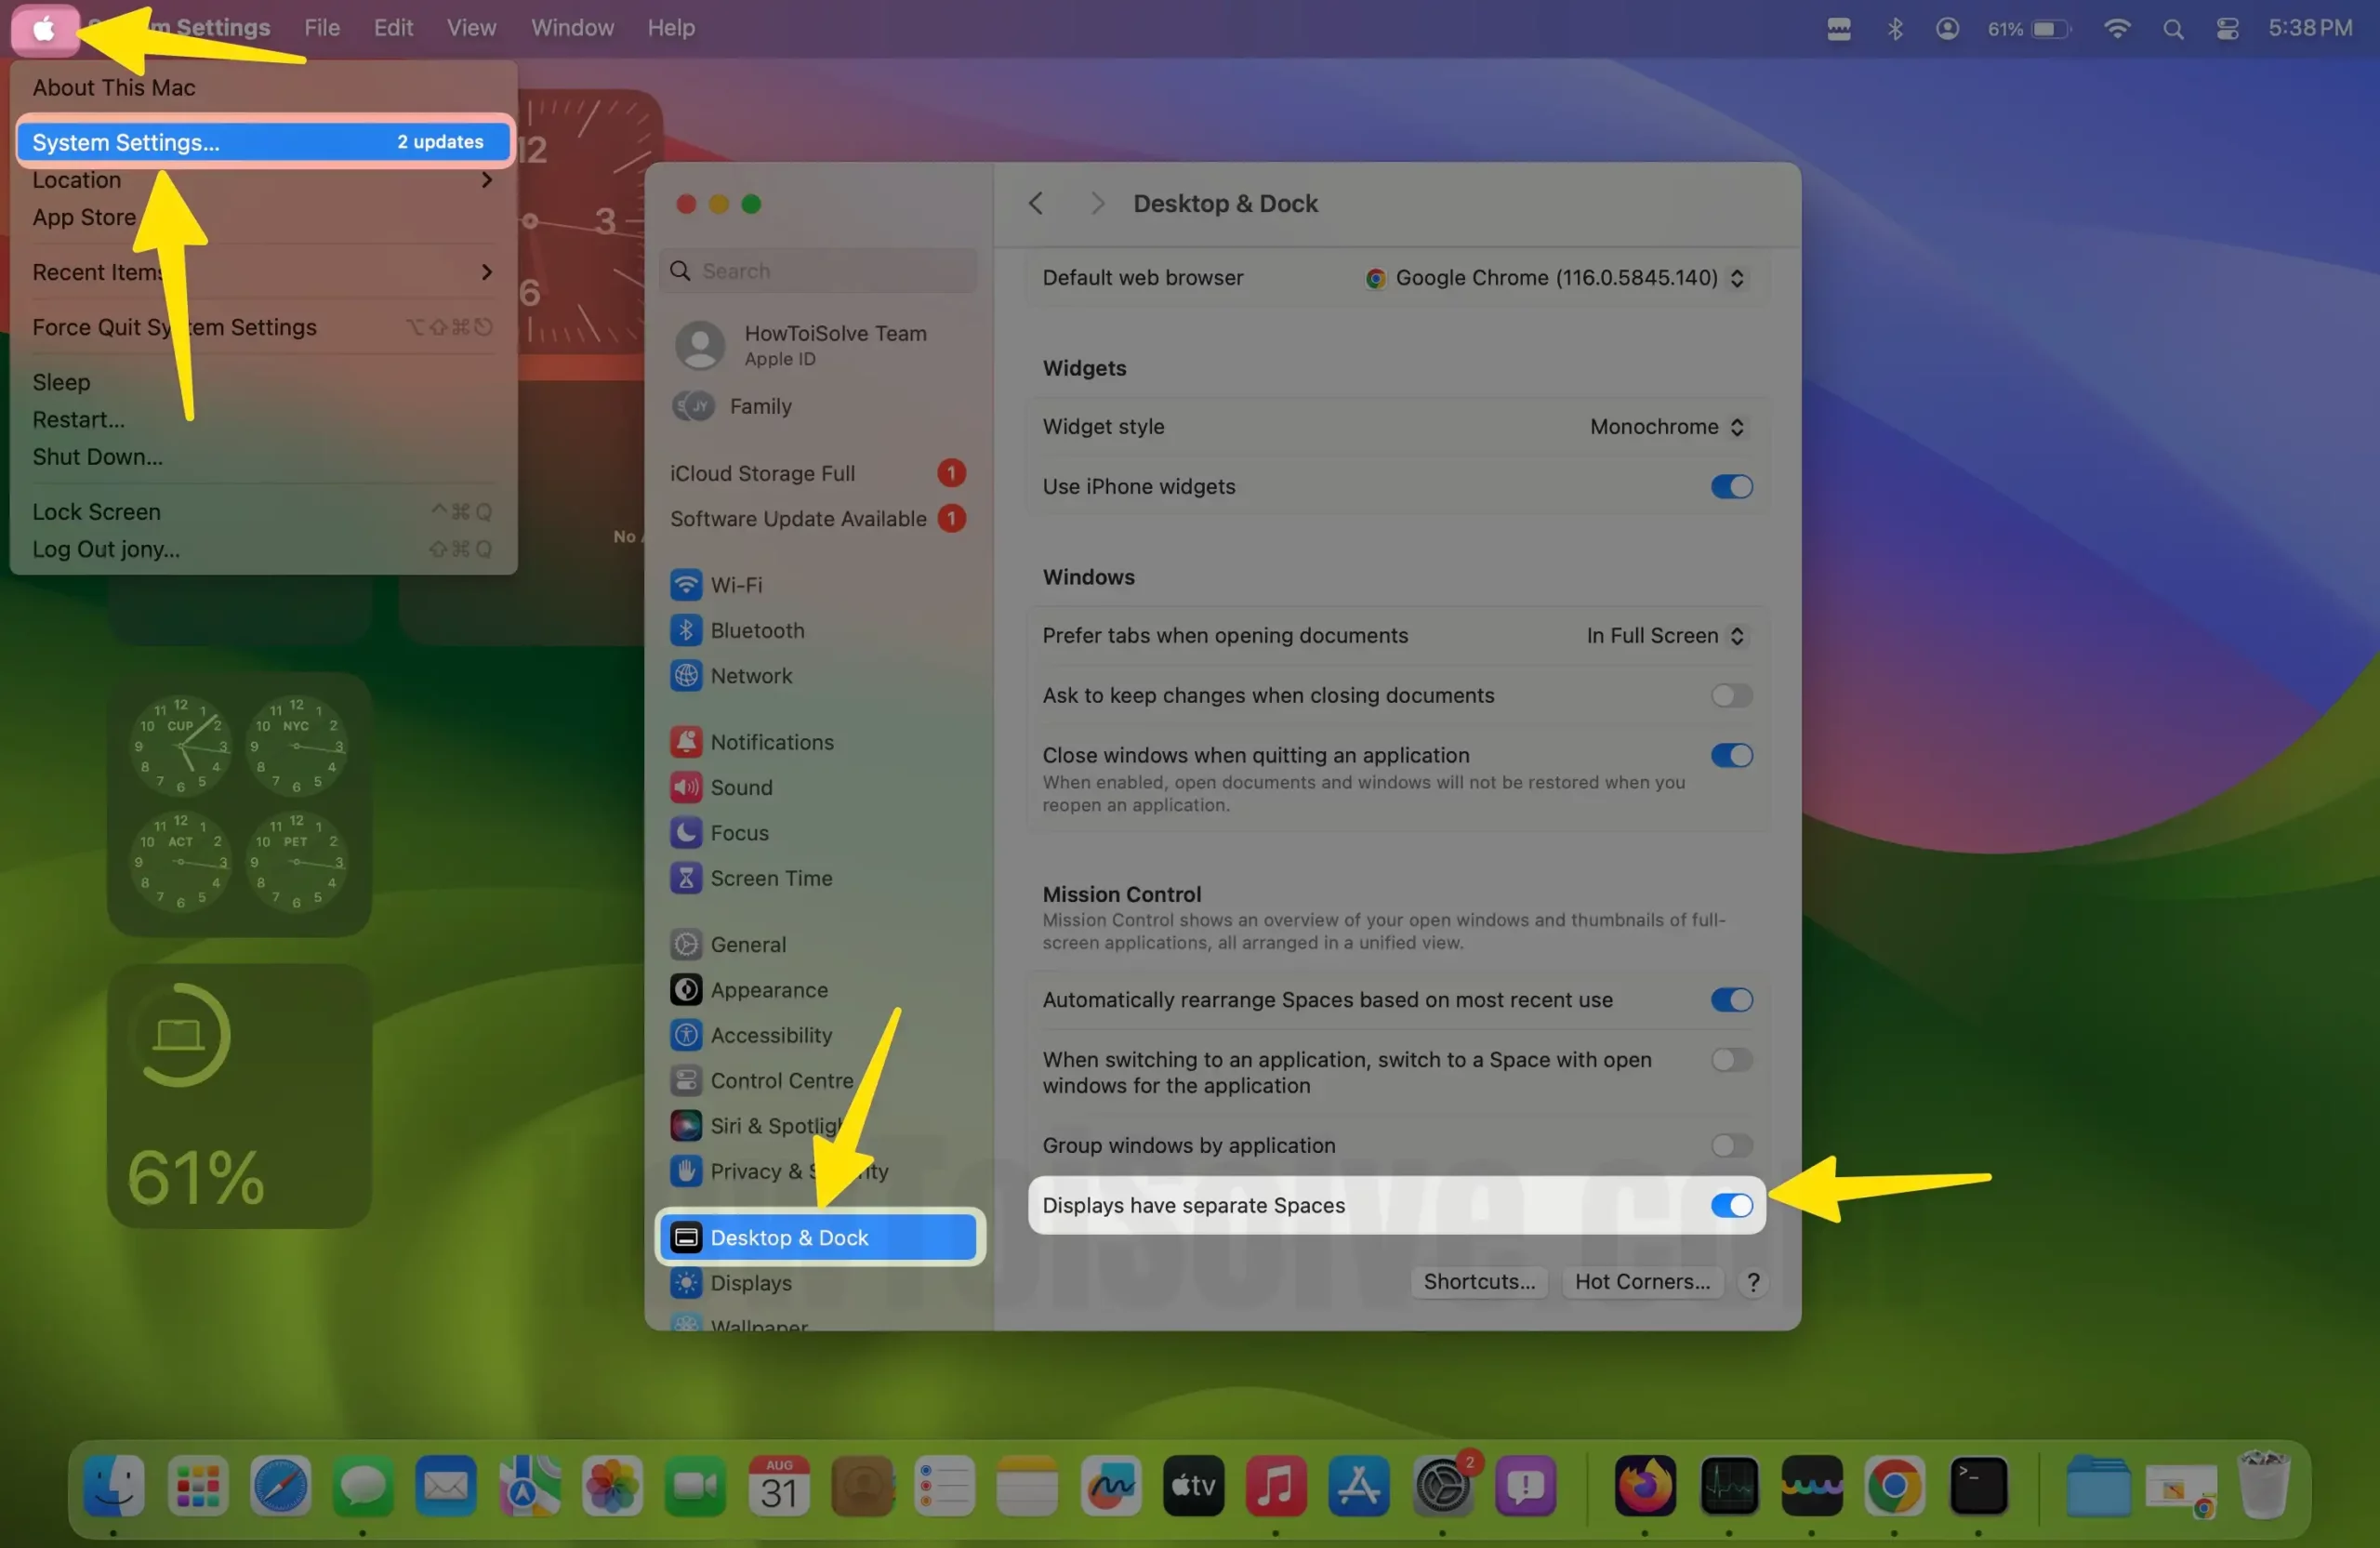 Displays have separate Spaces on Mac settings for Split View